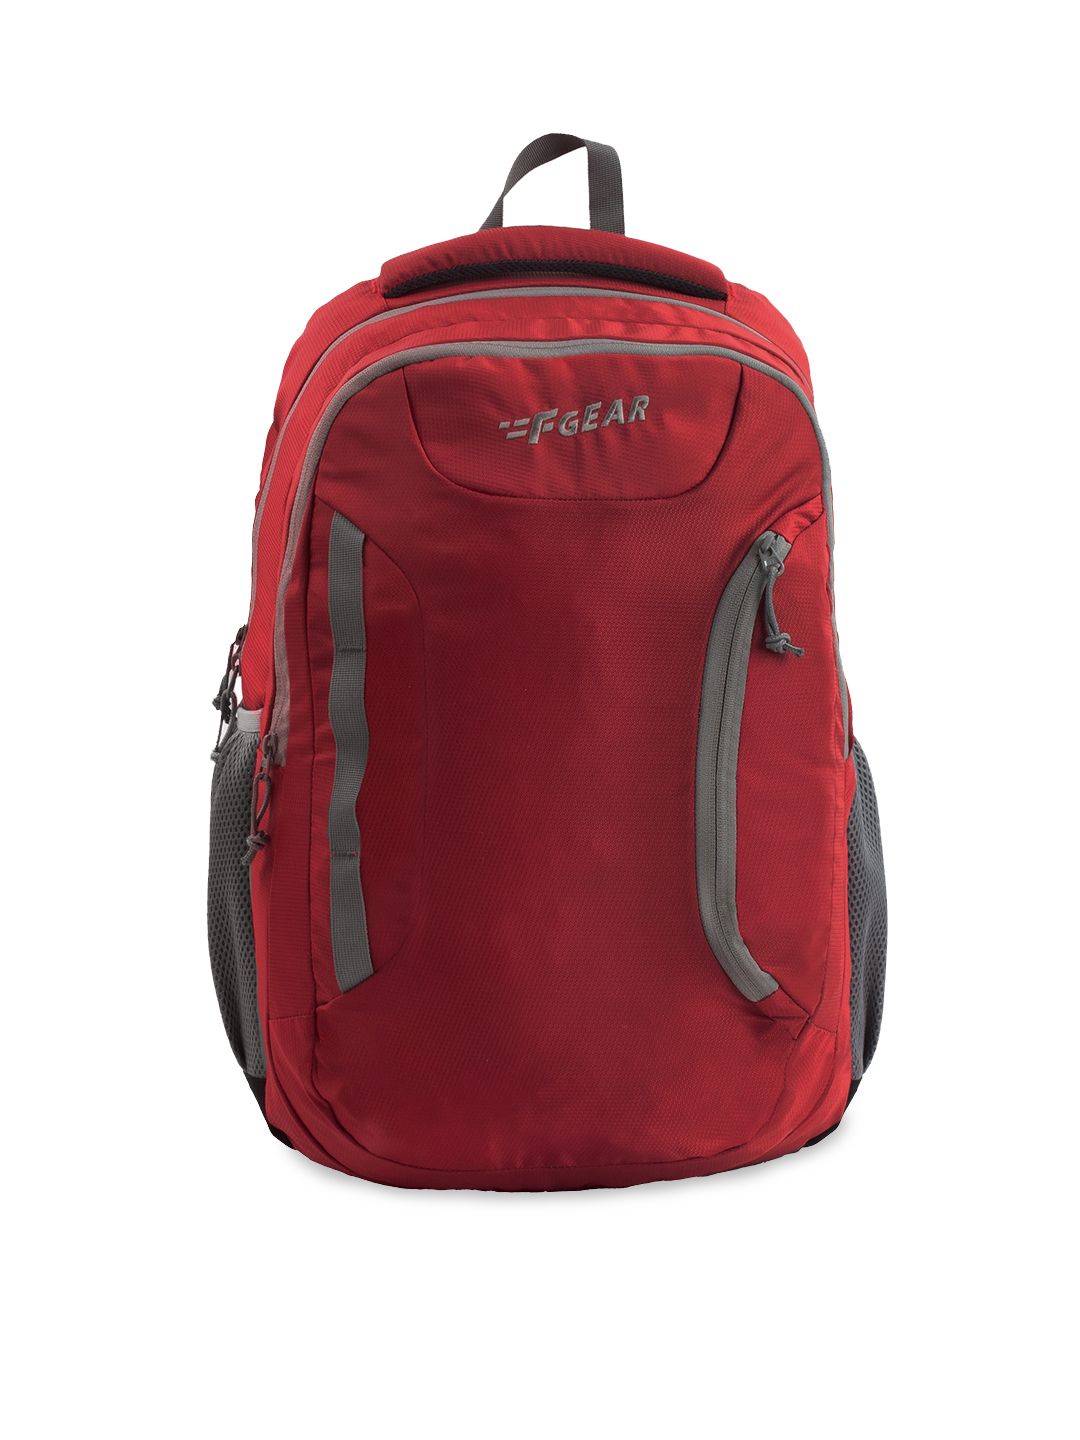 F Gear Unisex Red & Grey Backpack Price in India